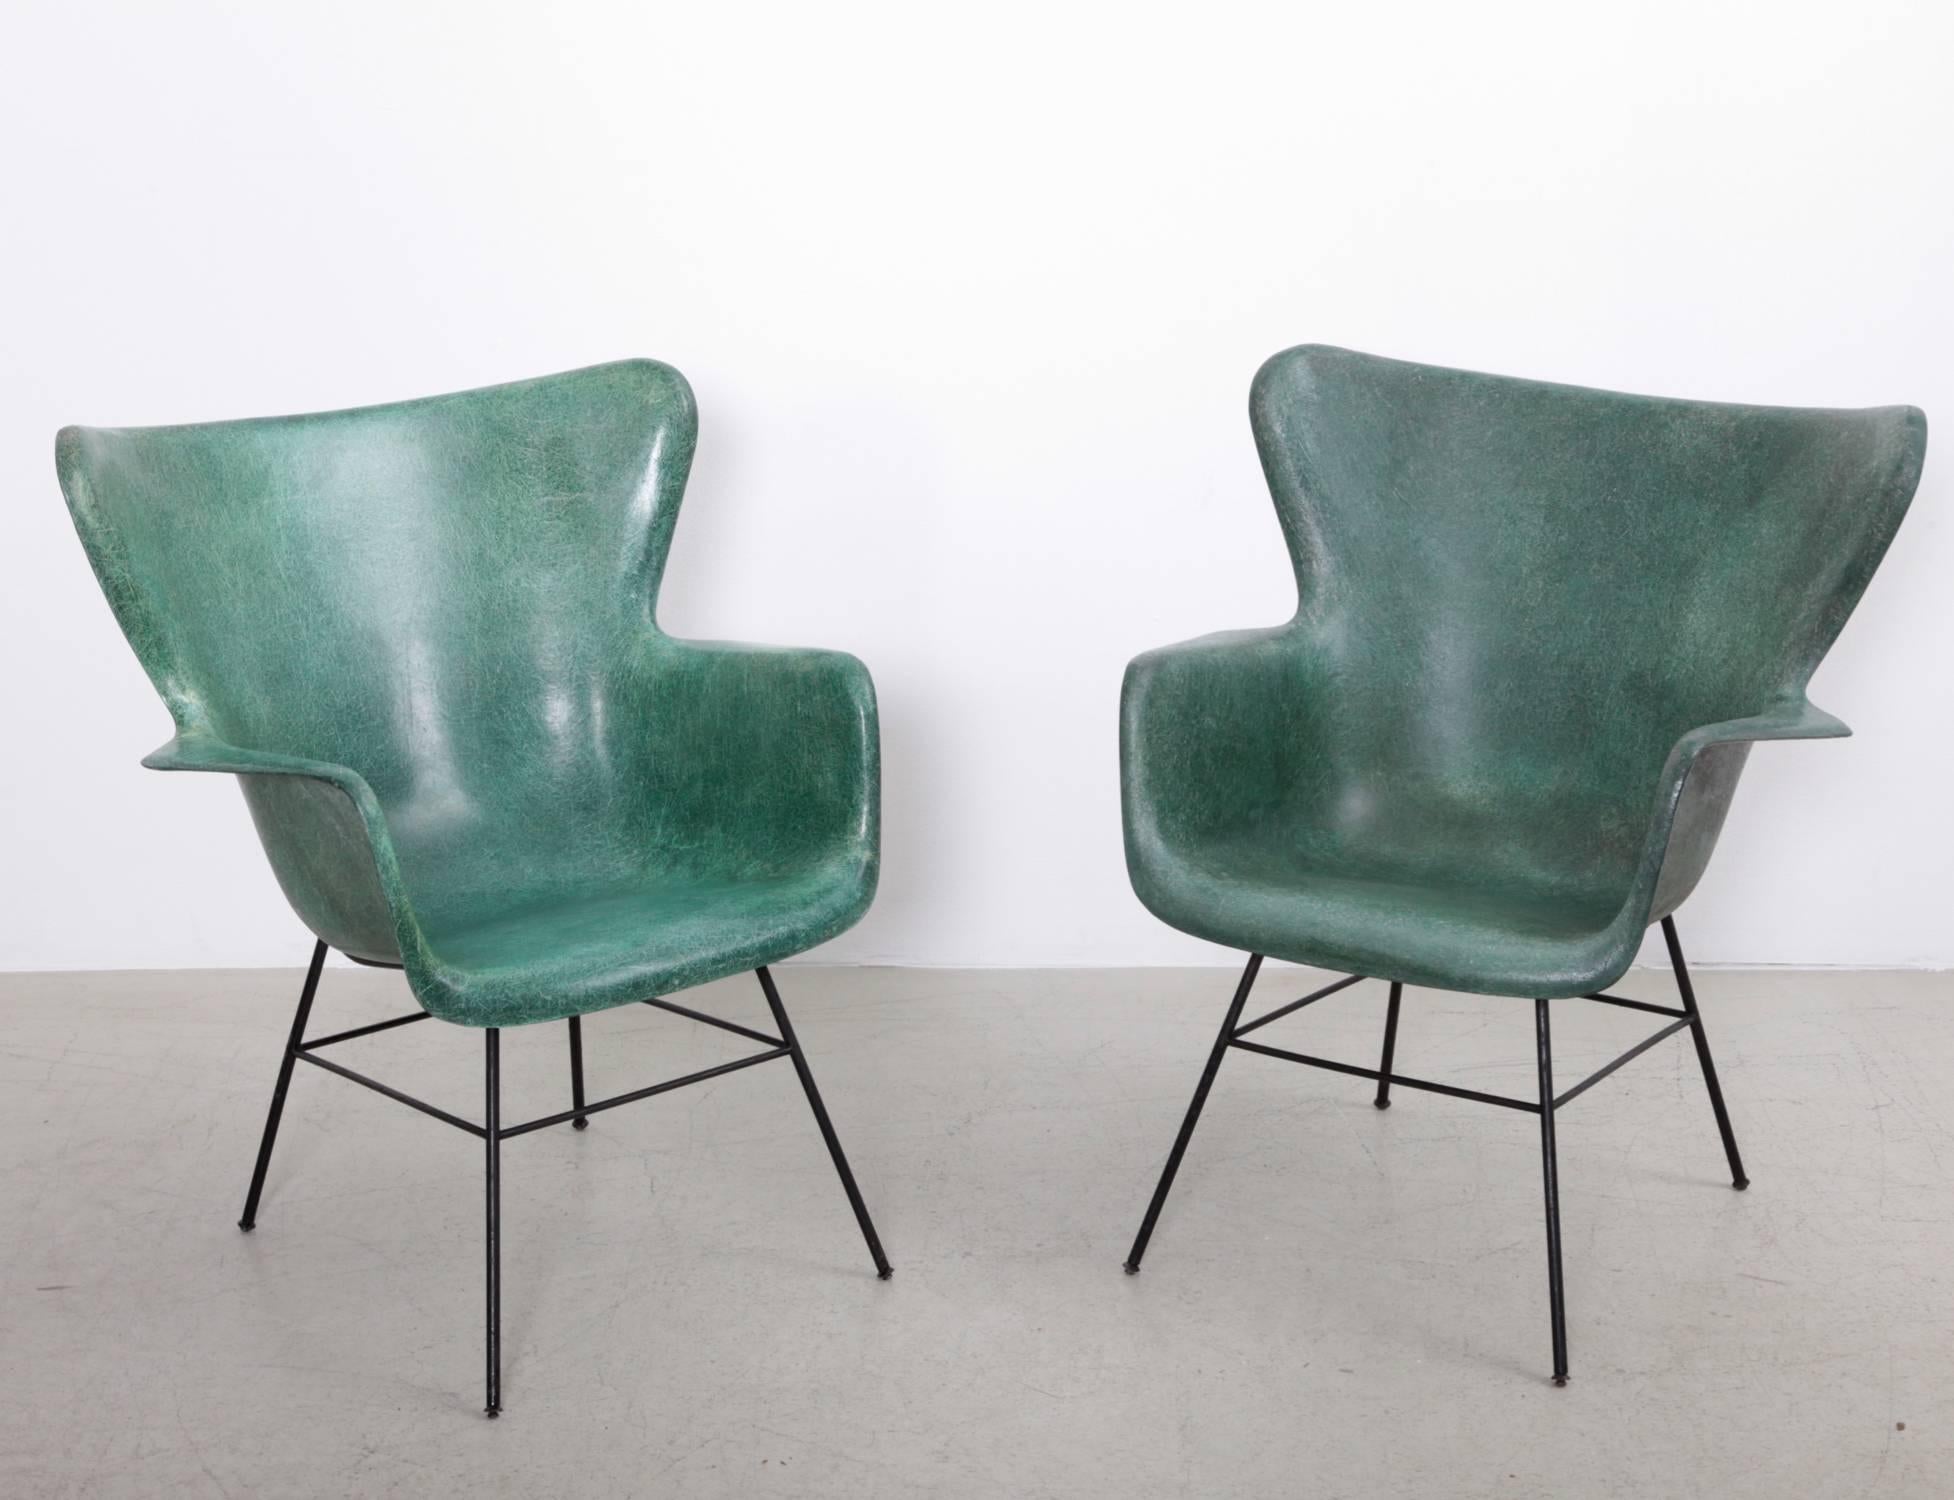 Pair of Luther Conover fiberglass and black wire iron lounge chairs. Strong exposed fibers.